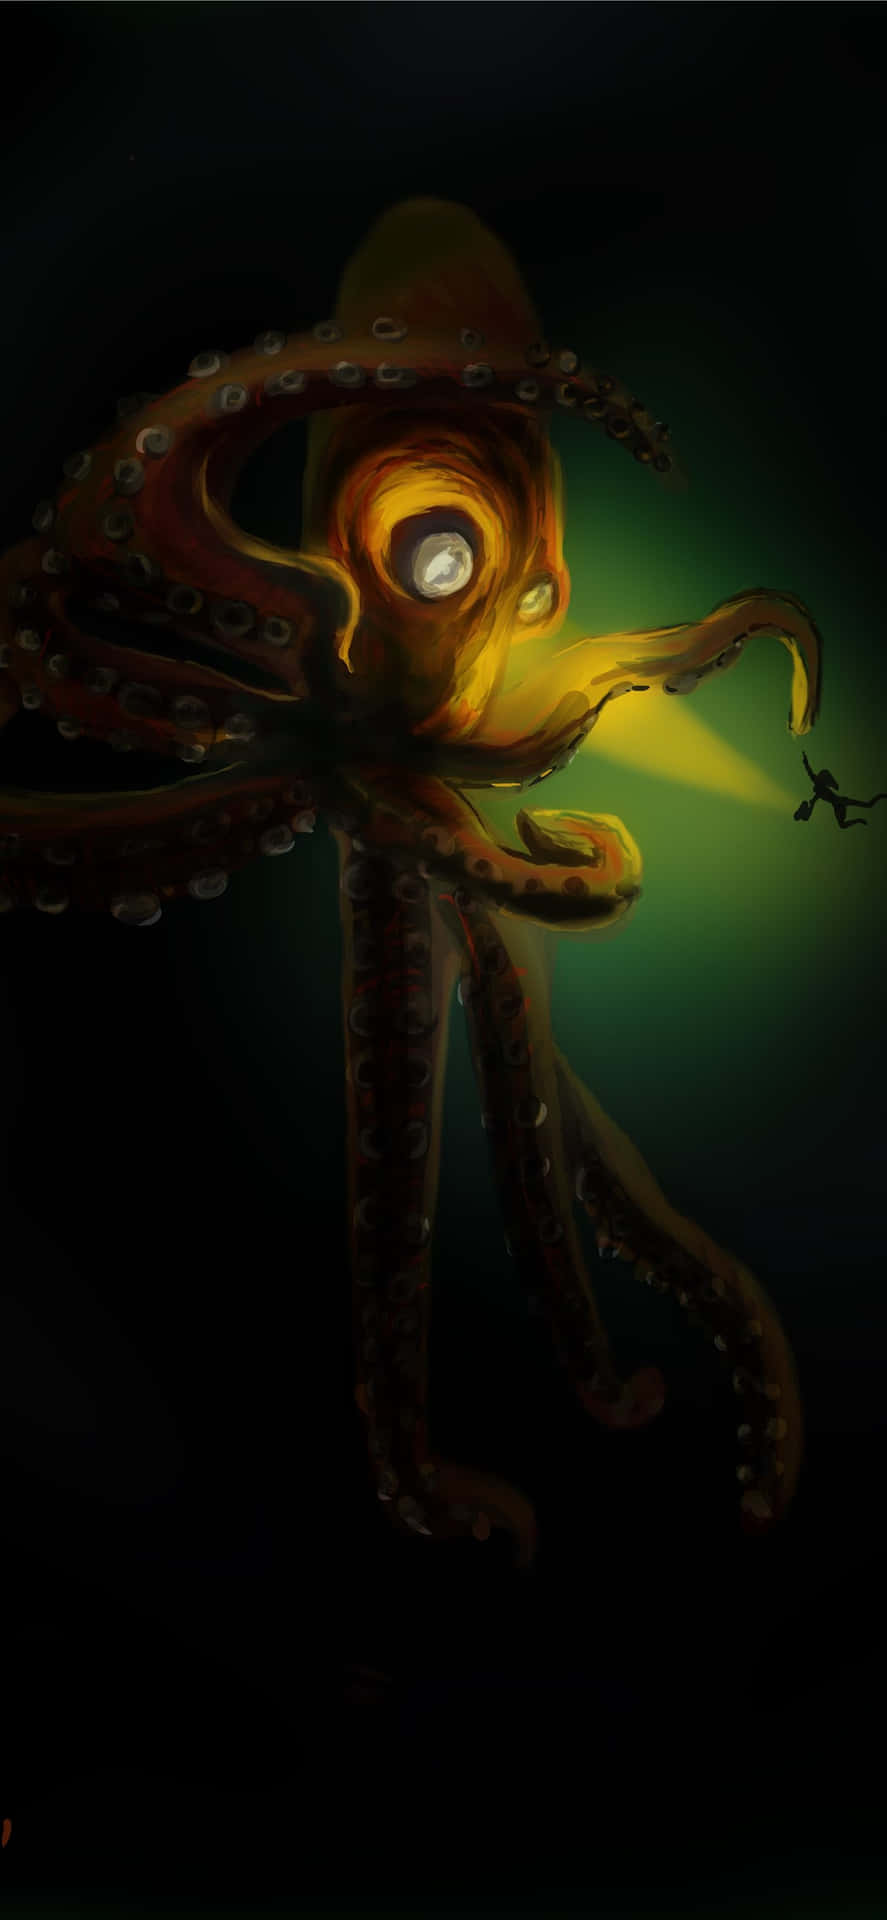 “A Giant Squid Lurking in the Depths of the Ocean”